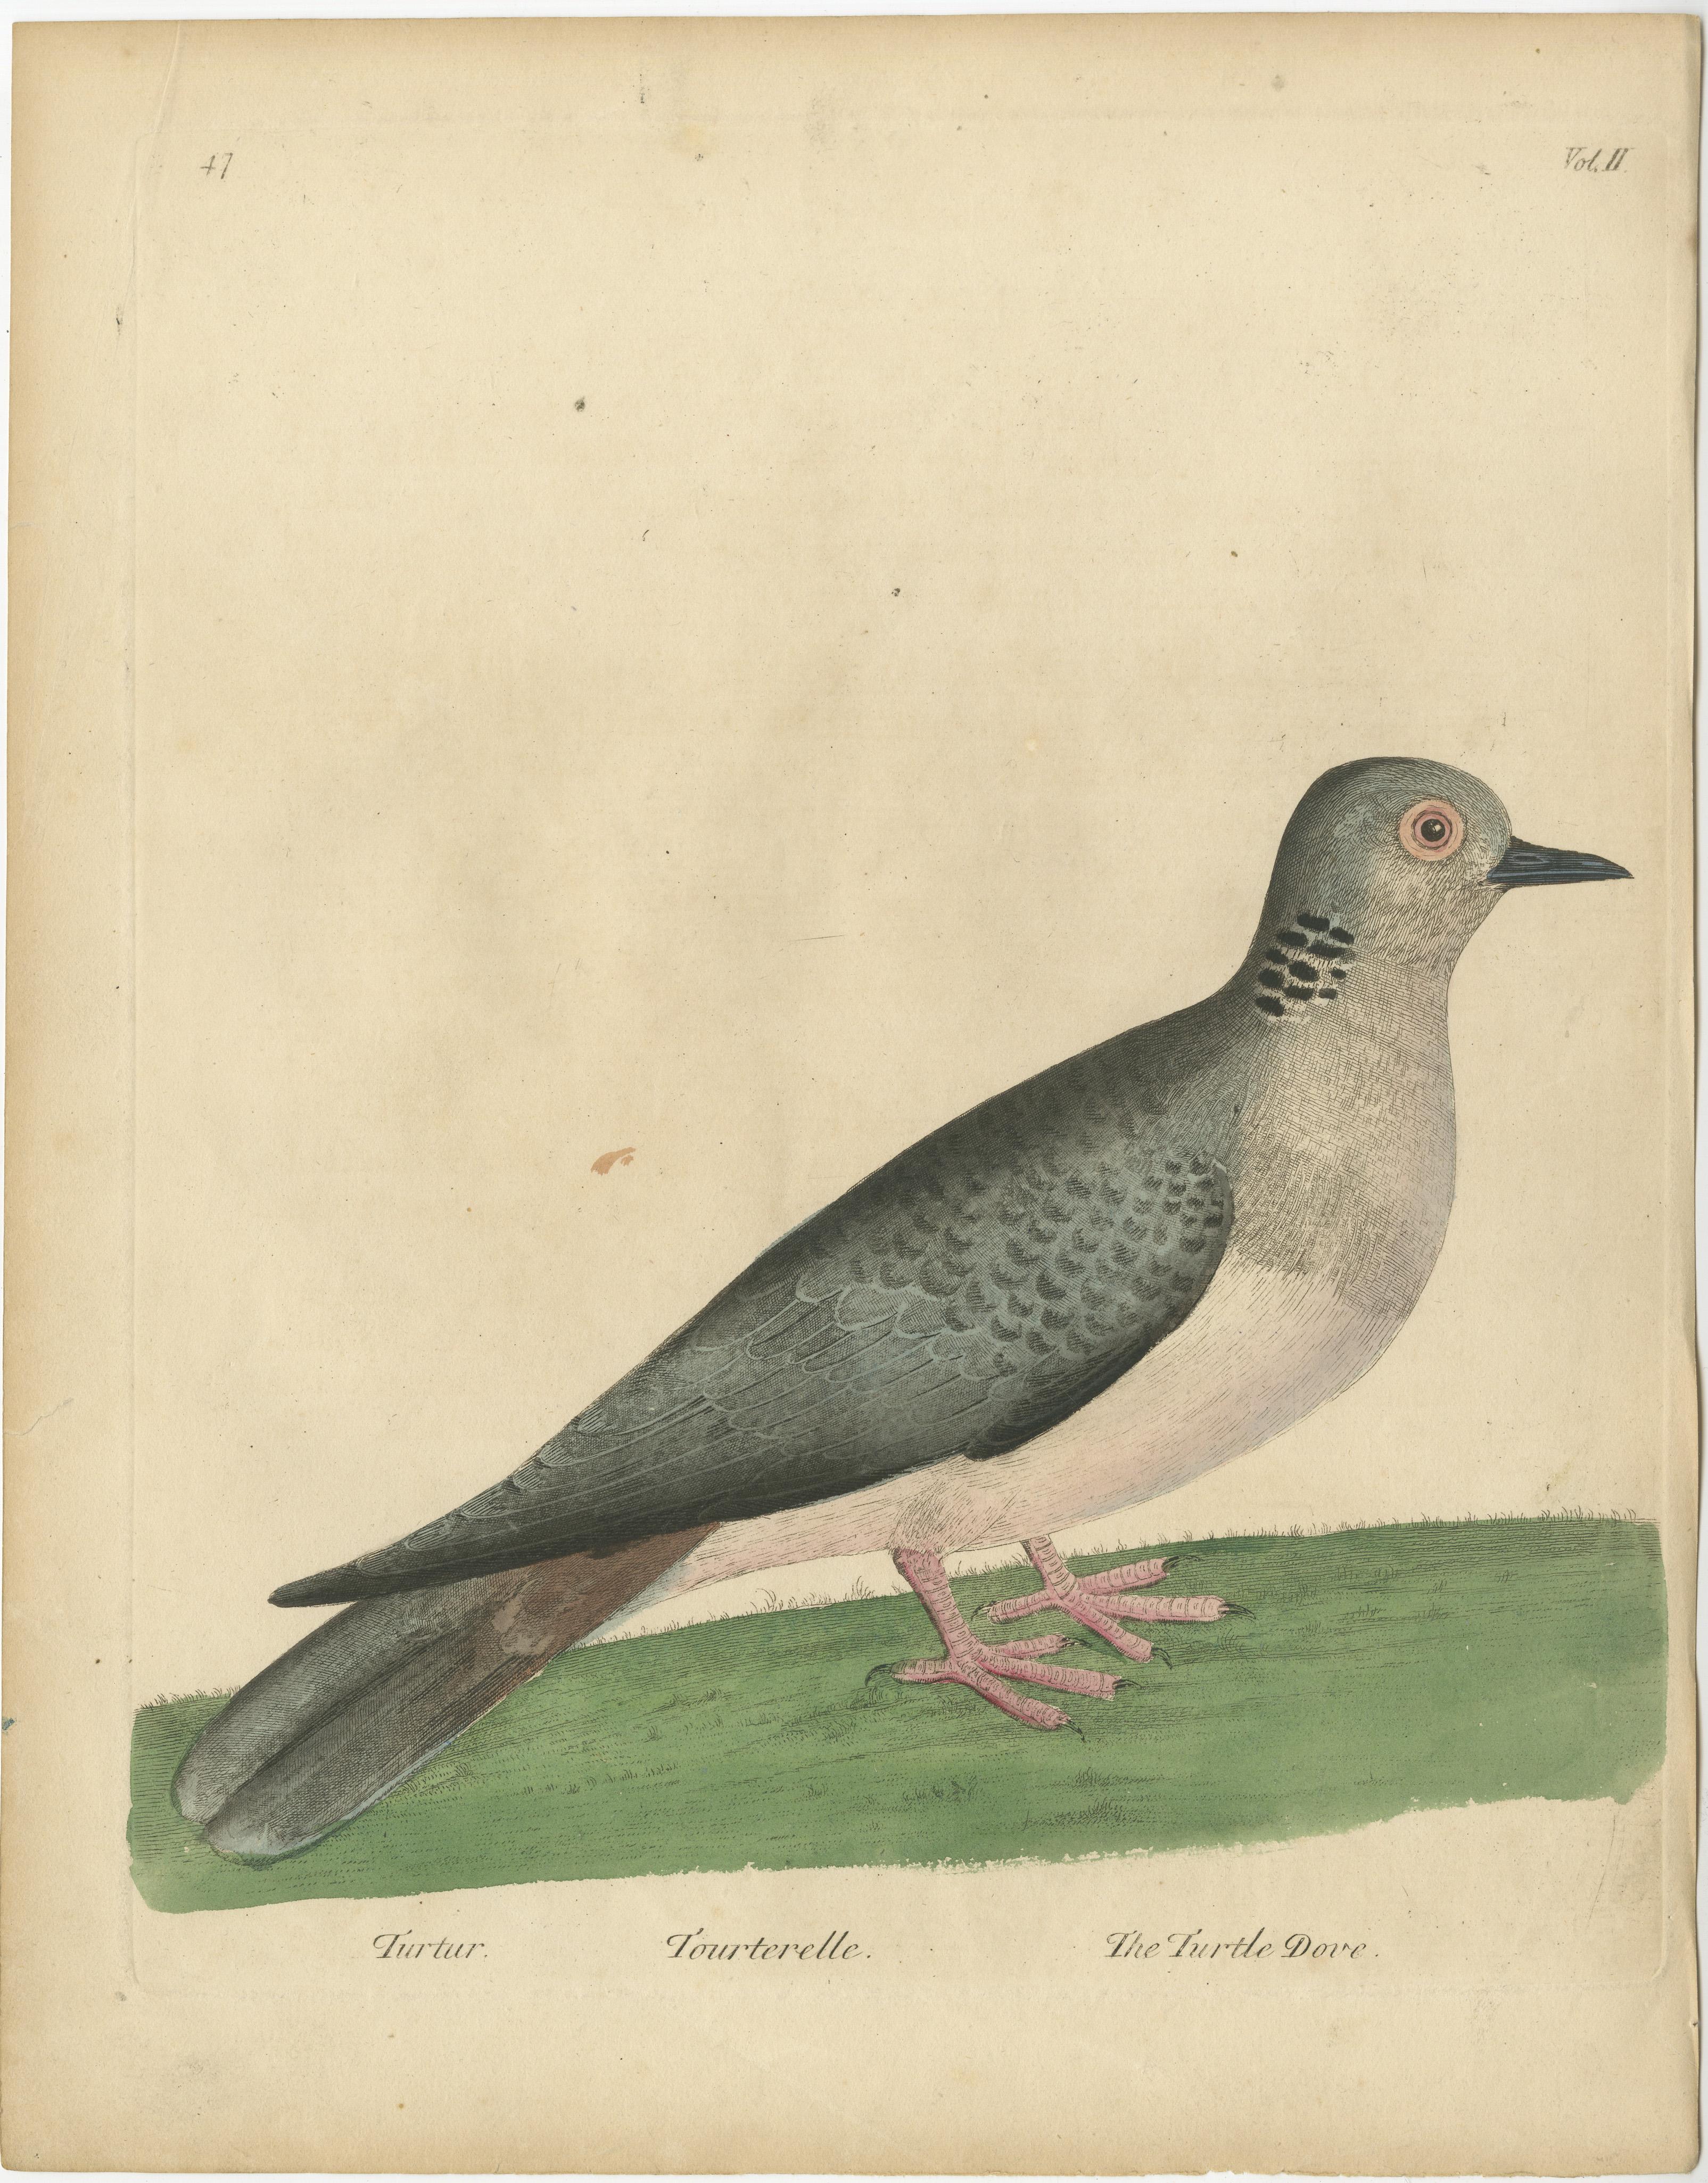 Antique bird print titled 'Turtur, Tourterelle, The Turtle Dove'. Original antique print of a turtle dove. This print originates from 'A Supplement to the Natural History of Birds illustrated with an Hundred and One Copper Plates (..)' by Eleazar